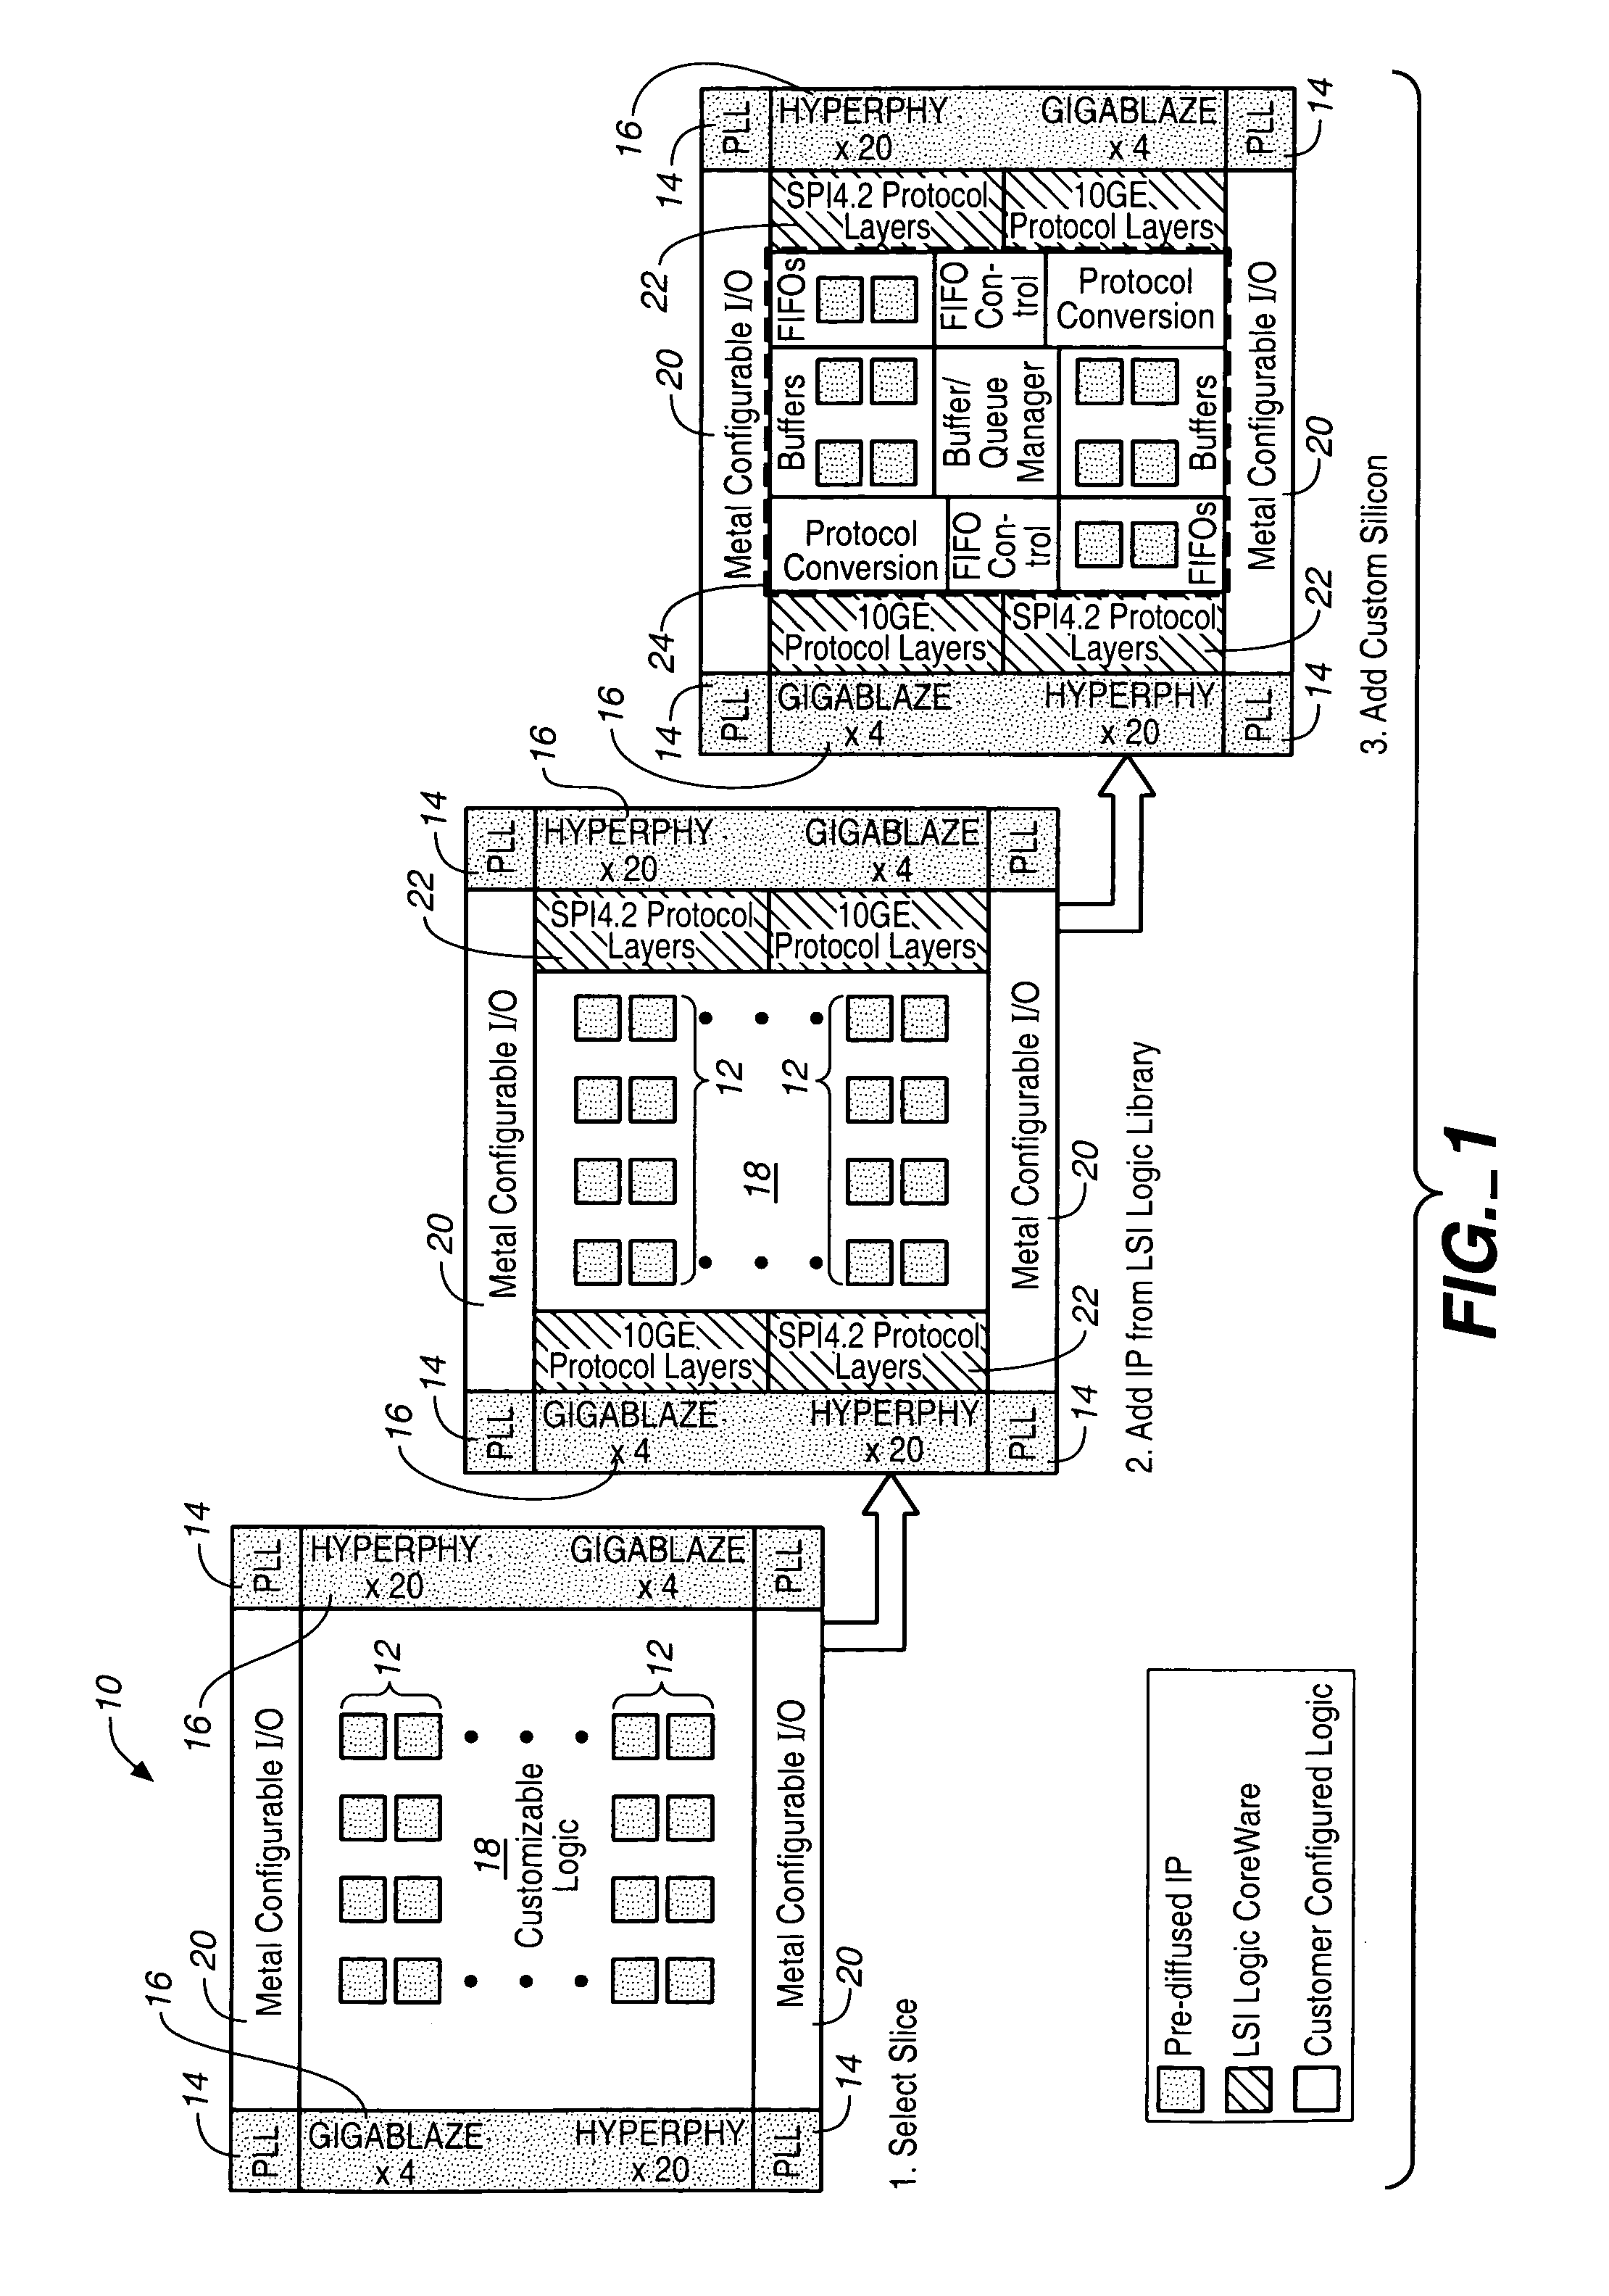 System and method for mapping logical components to physical locations in an integrated circuit design environment